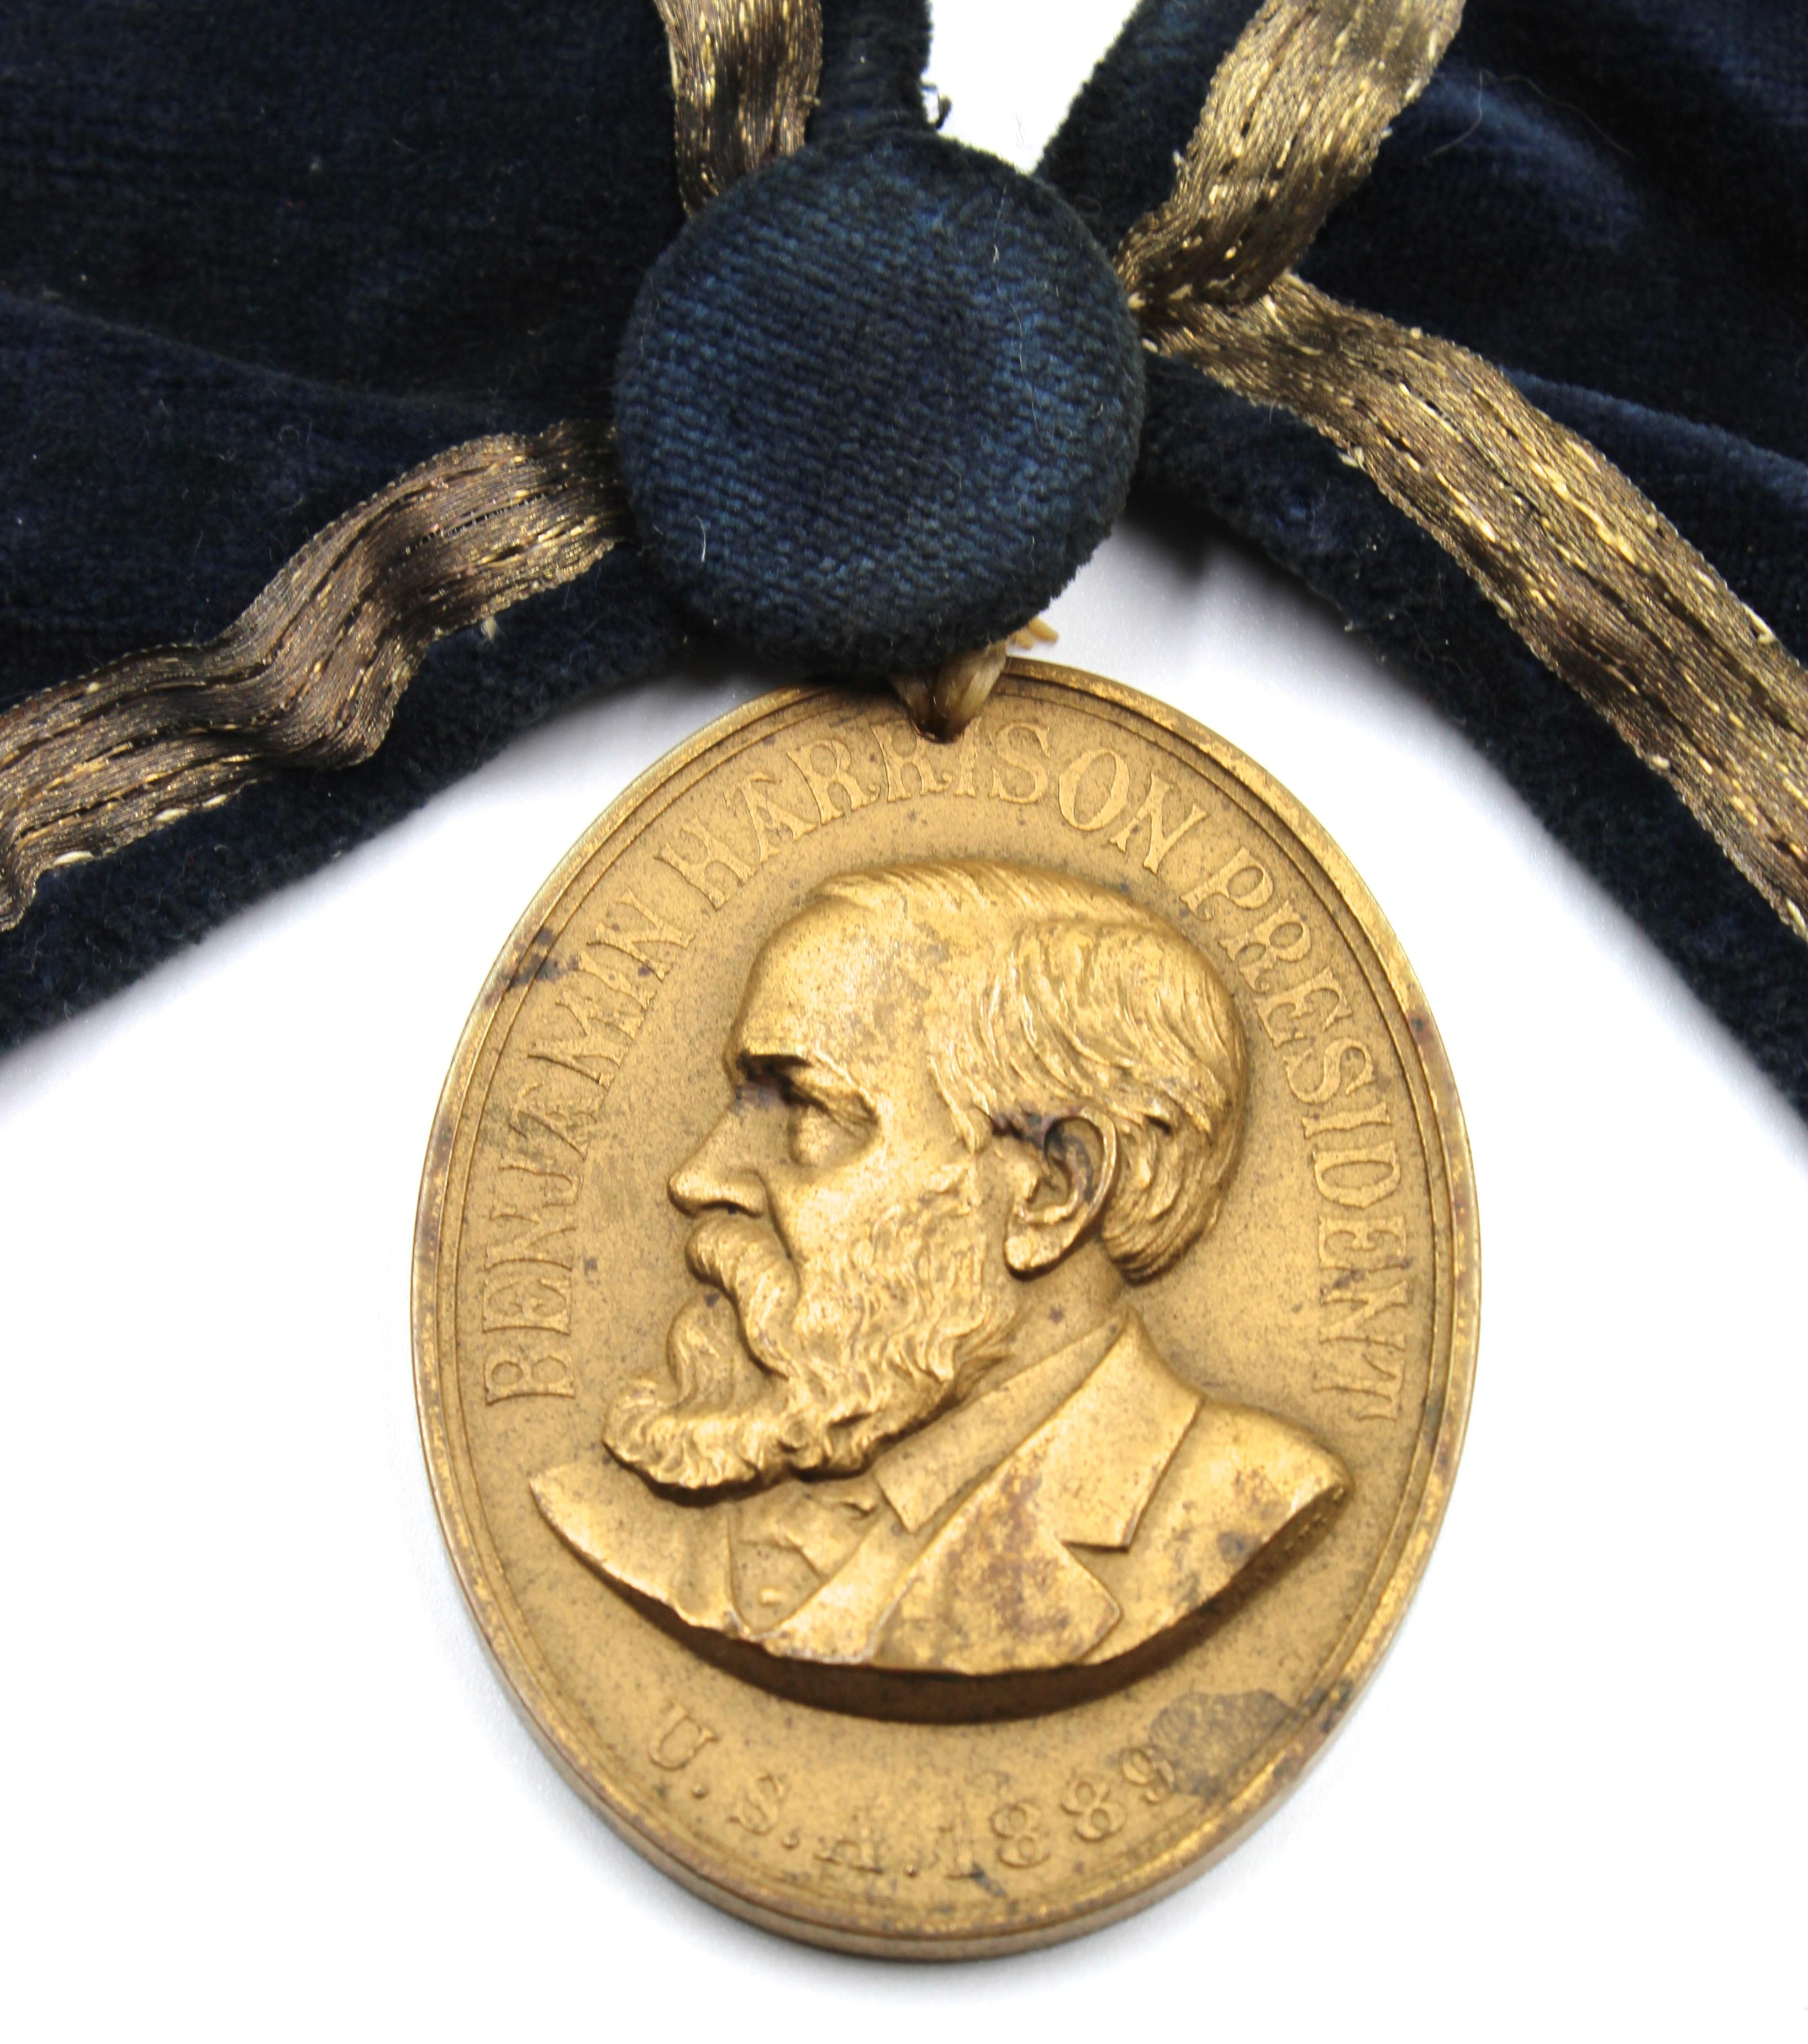 Presented is an original Benjamin Harrison presidential peace medal. This bronze medal was originally struck by the U.S. Mint in 1889 as a peace offering to the various Native American tribes in the U.S. The obverse of the medal has a raised relief